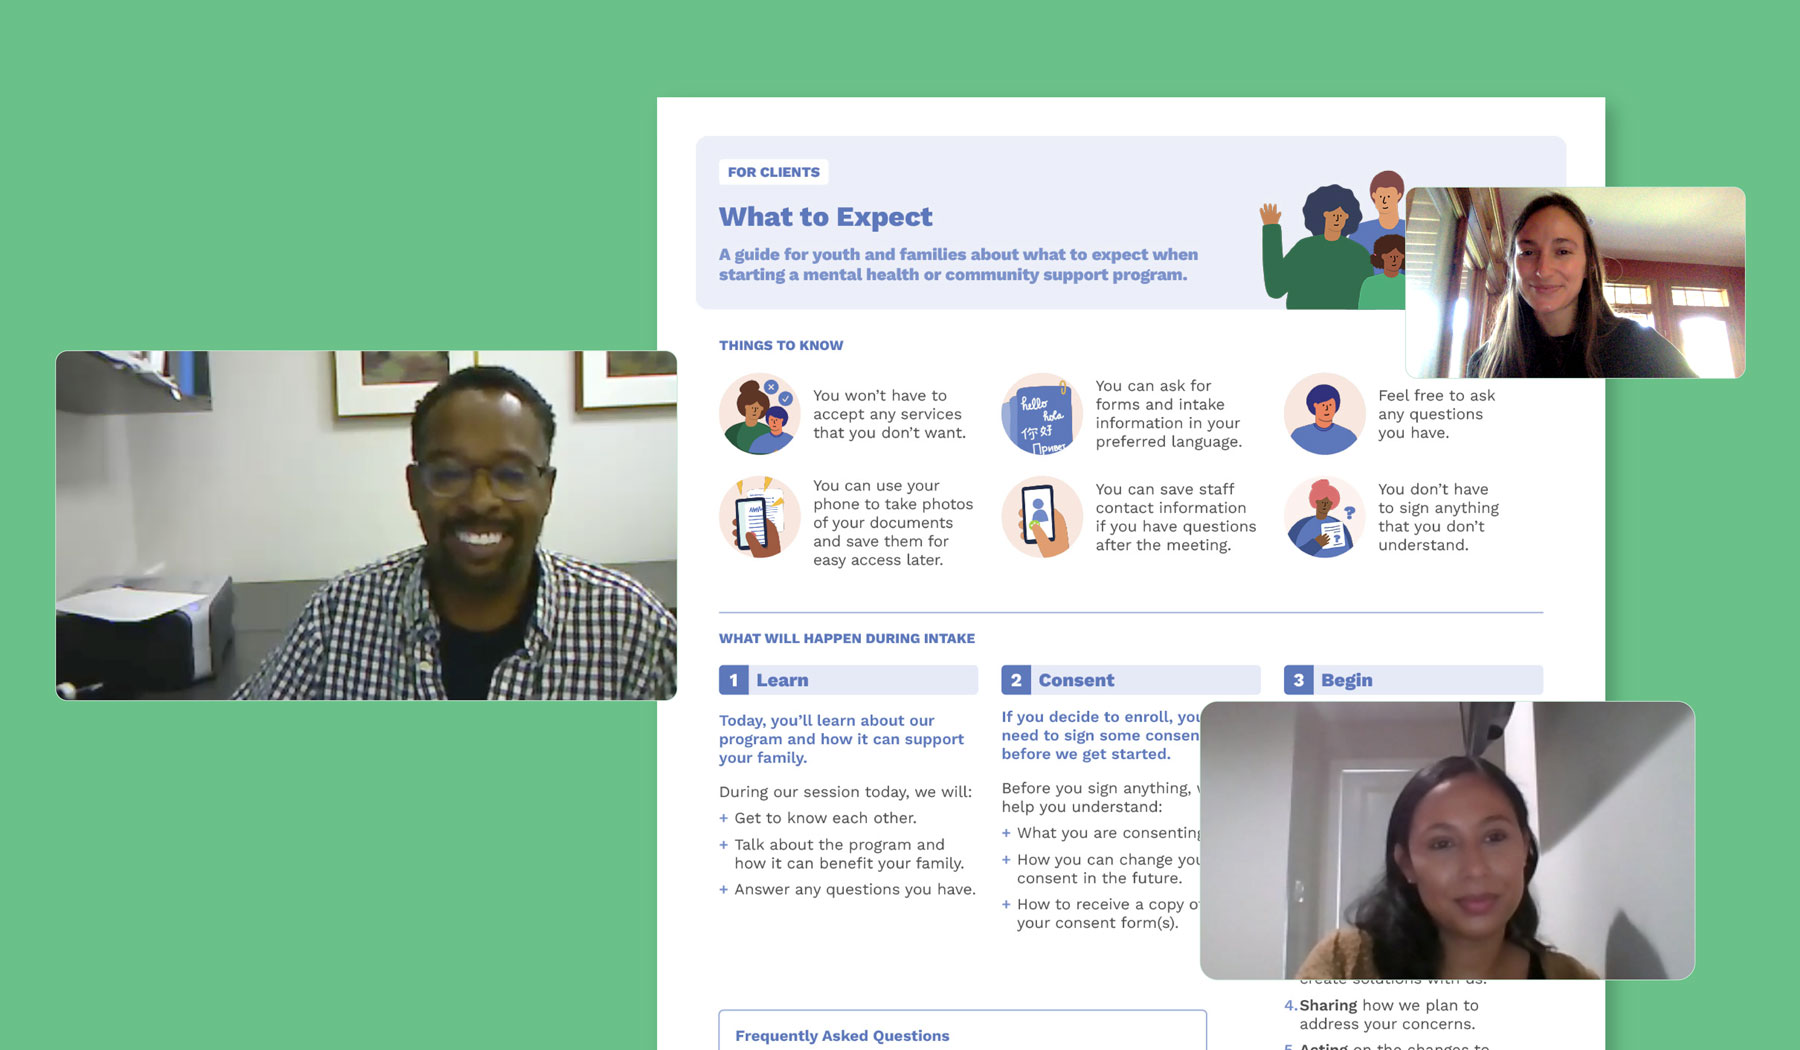 Screenshots of video chat windows for three collaborators are superimposed over a document explaining what to expect when starting a mental health or community support system for foster youth and families.